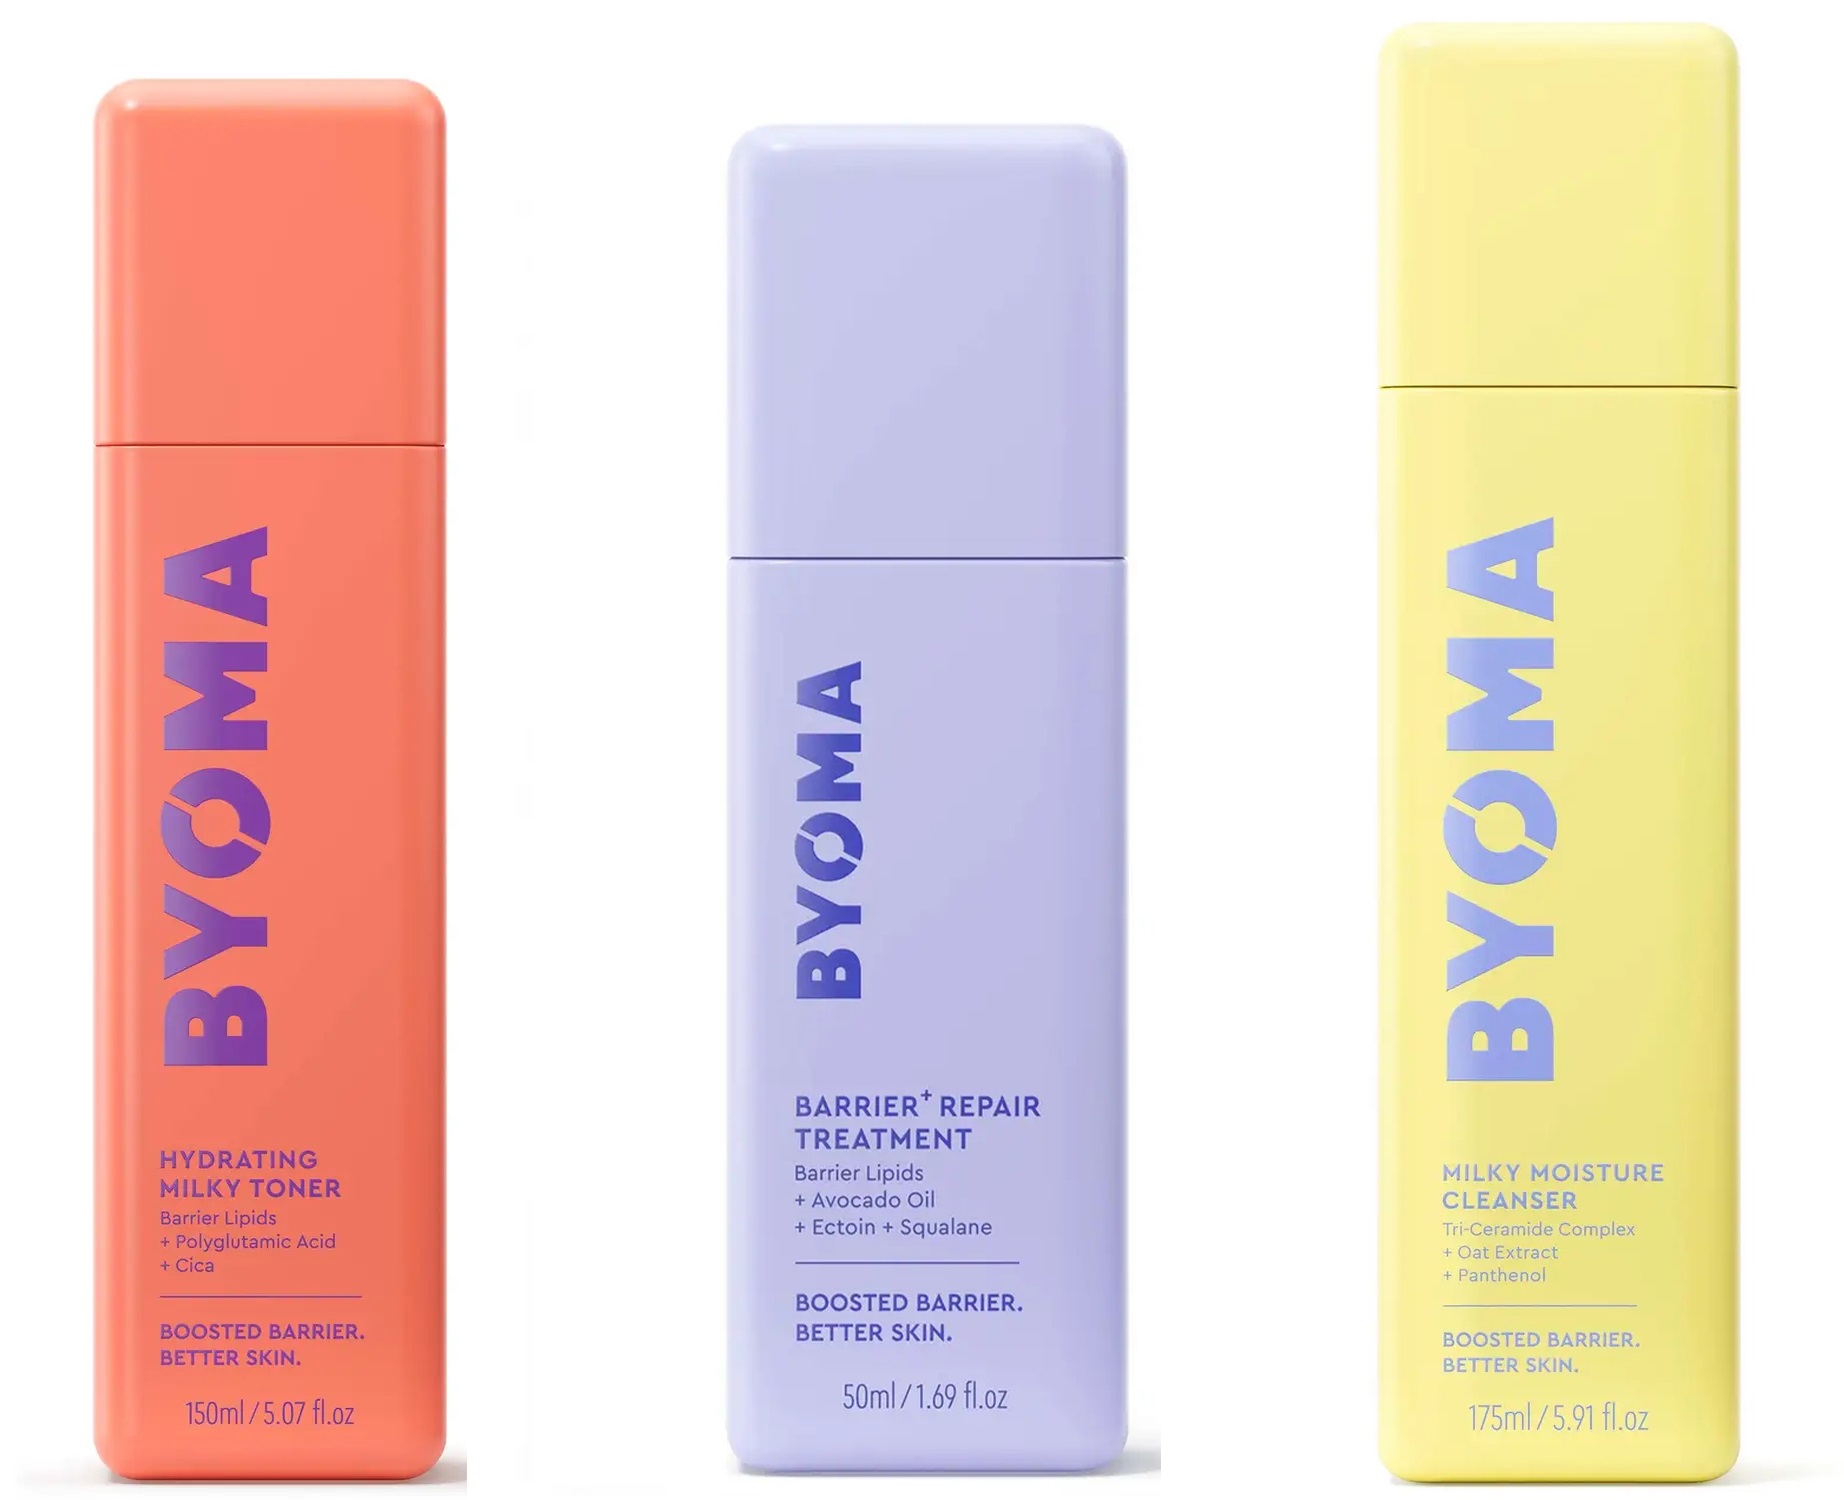 New launches from BYOMA